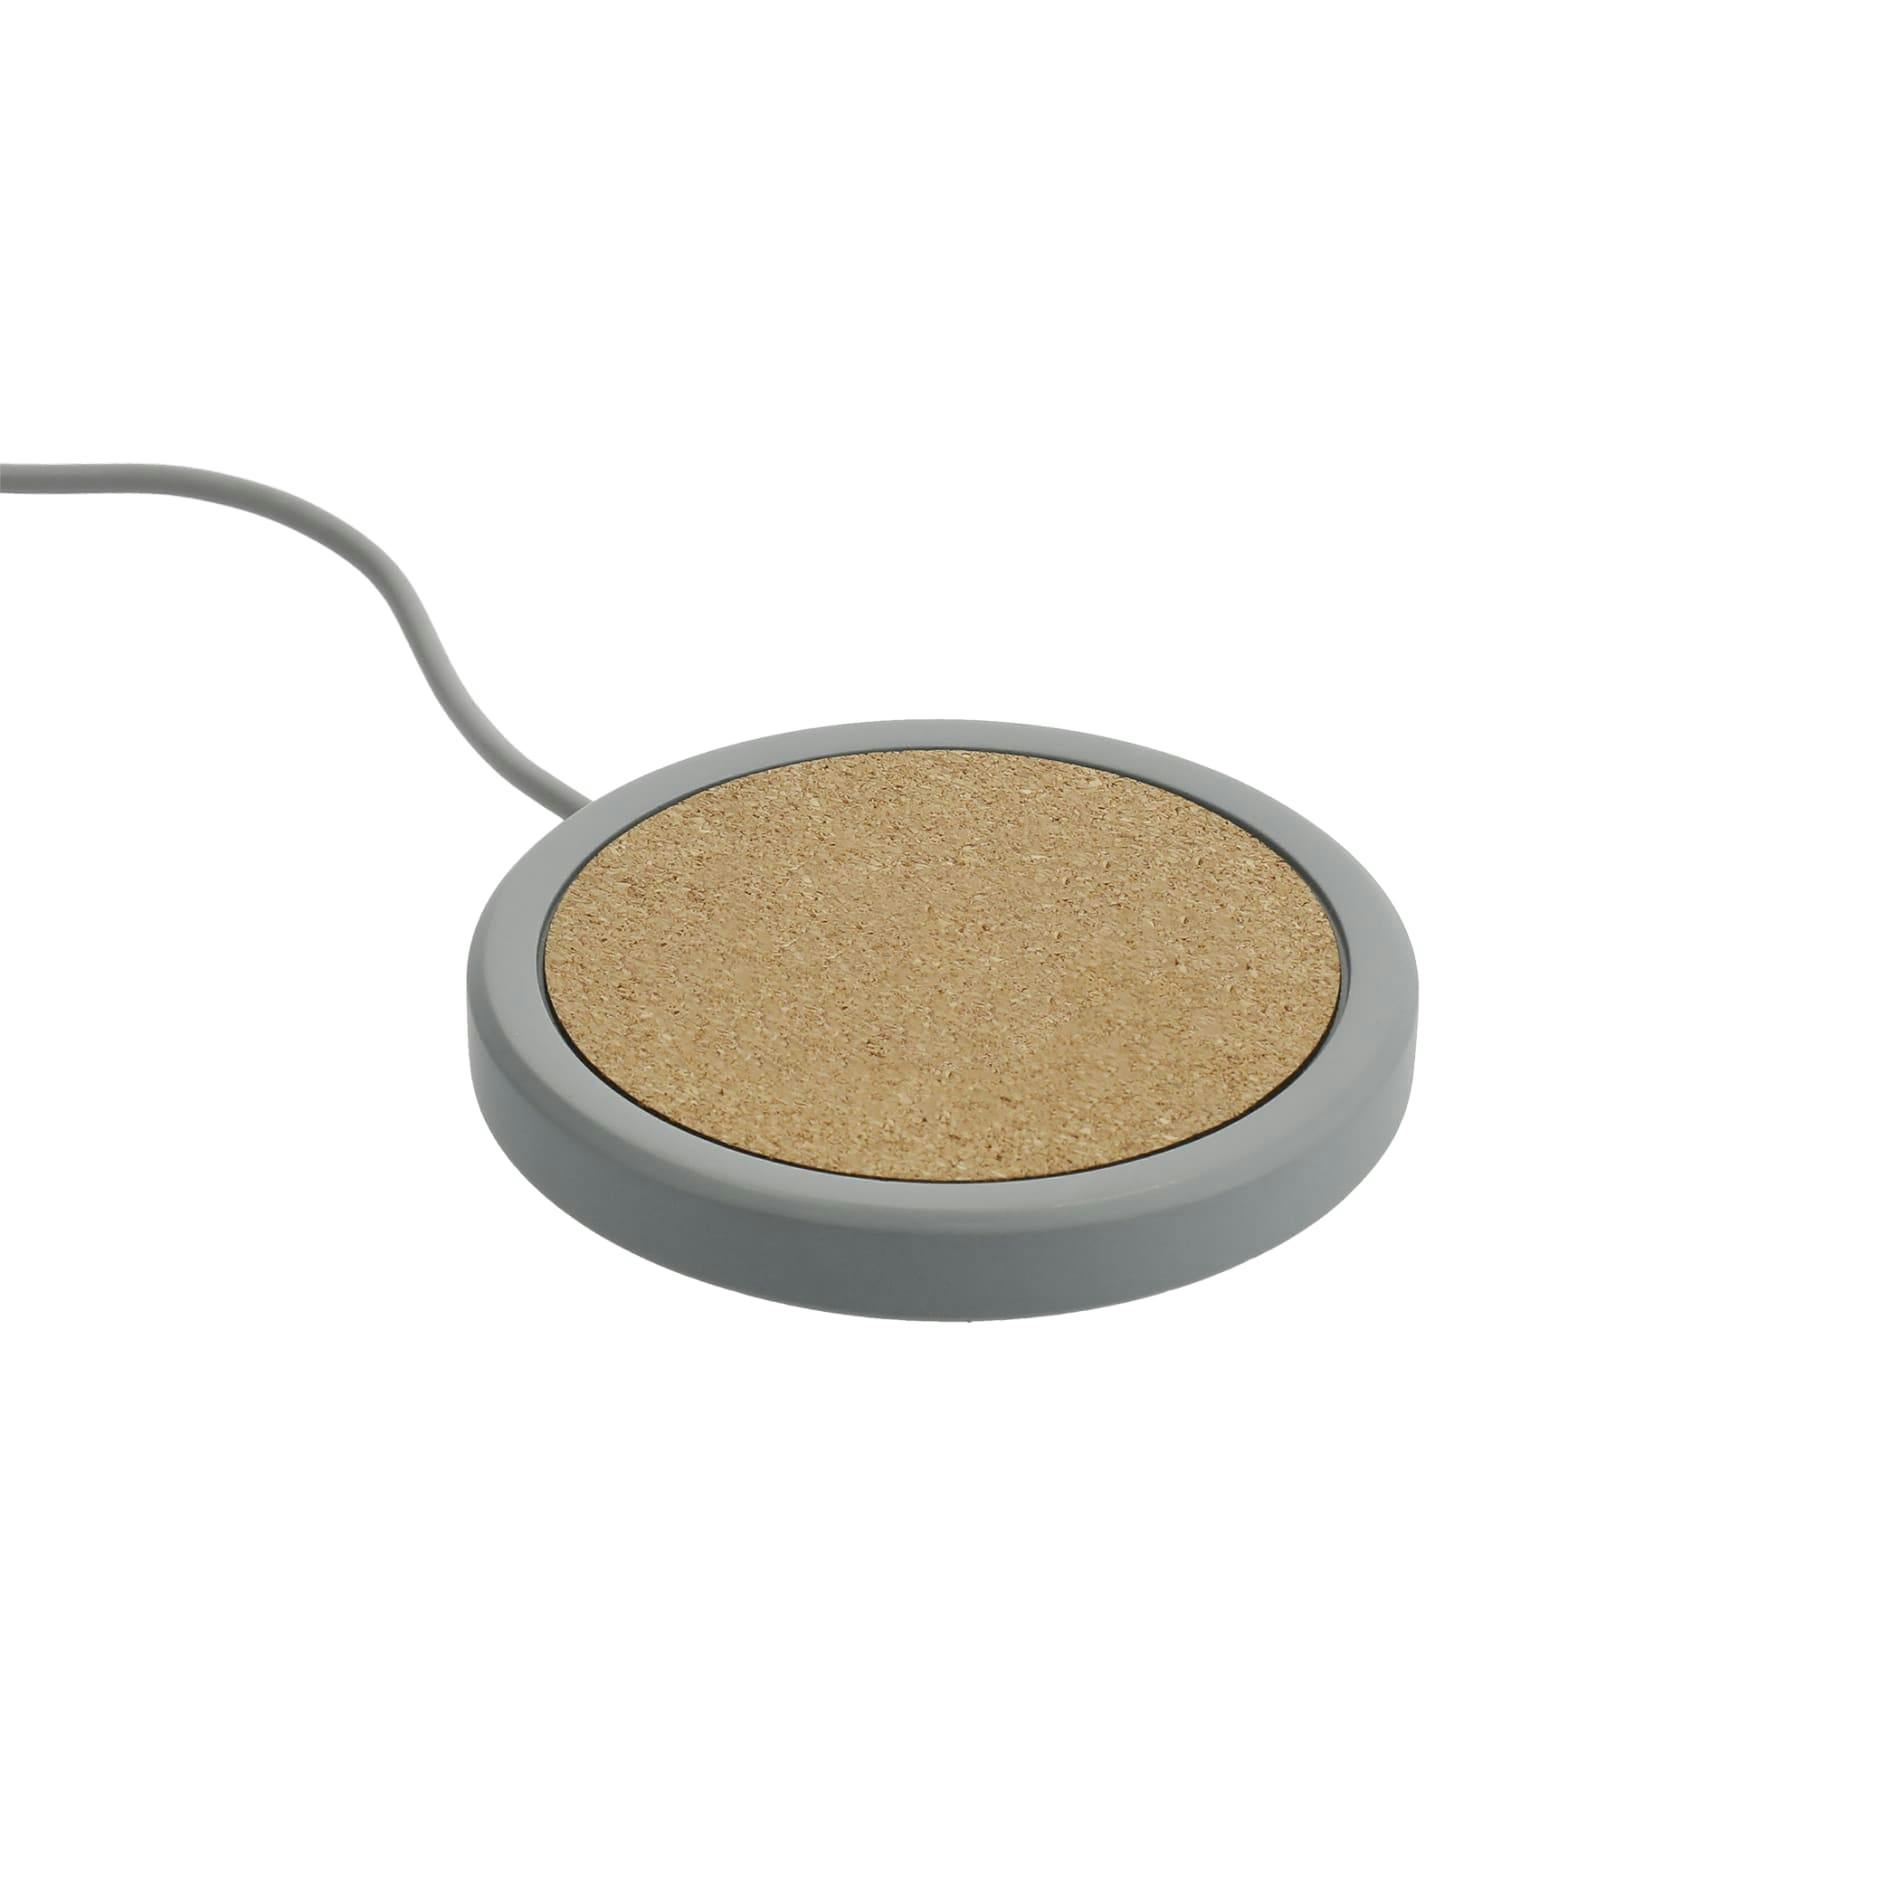 Set in Stone Fast Wireless Charging Pad - additional Image 1